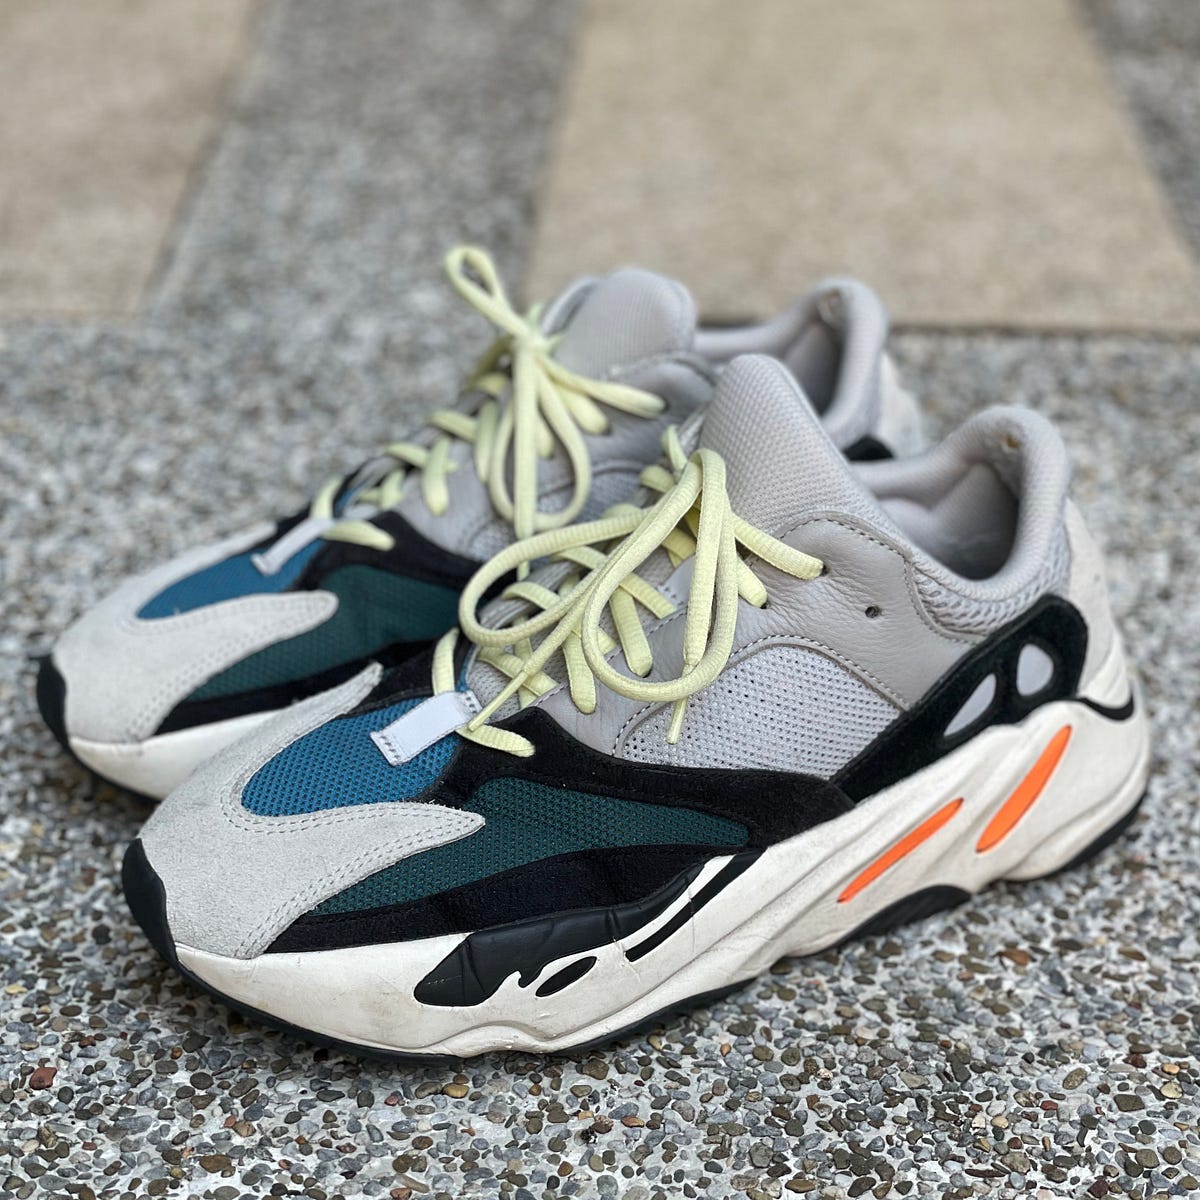 Kanye West Steps Out in An Unreleased Adidas Yeezy Boost 700